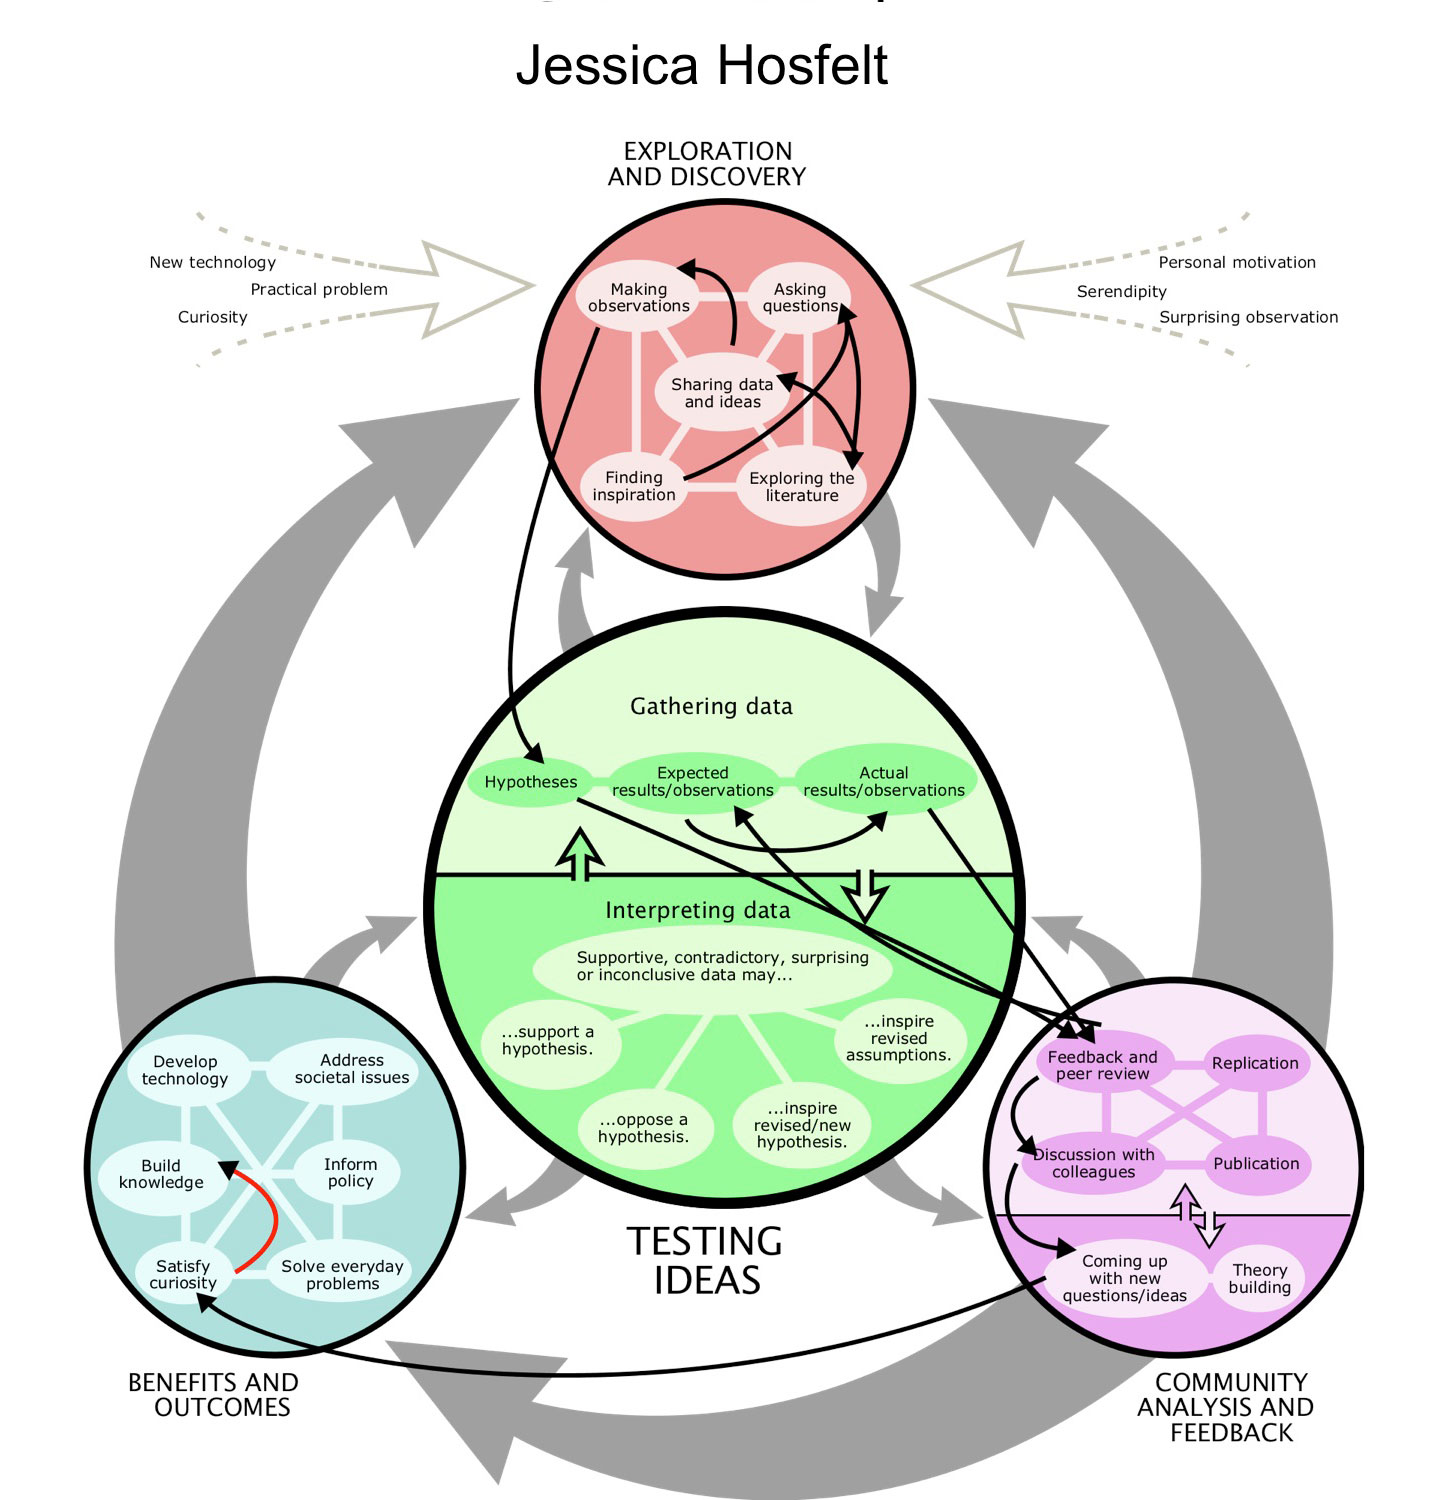 Jessica's Science Map